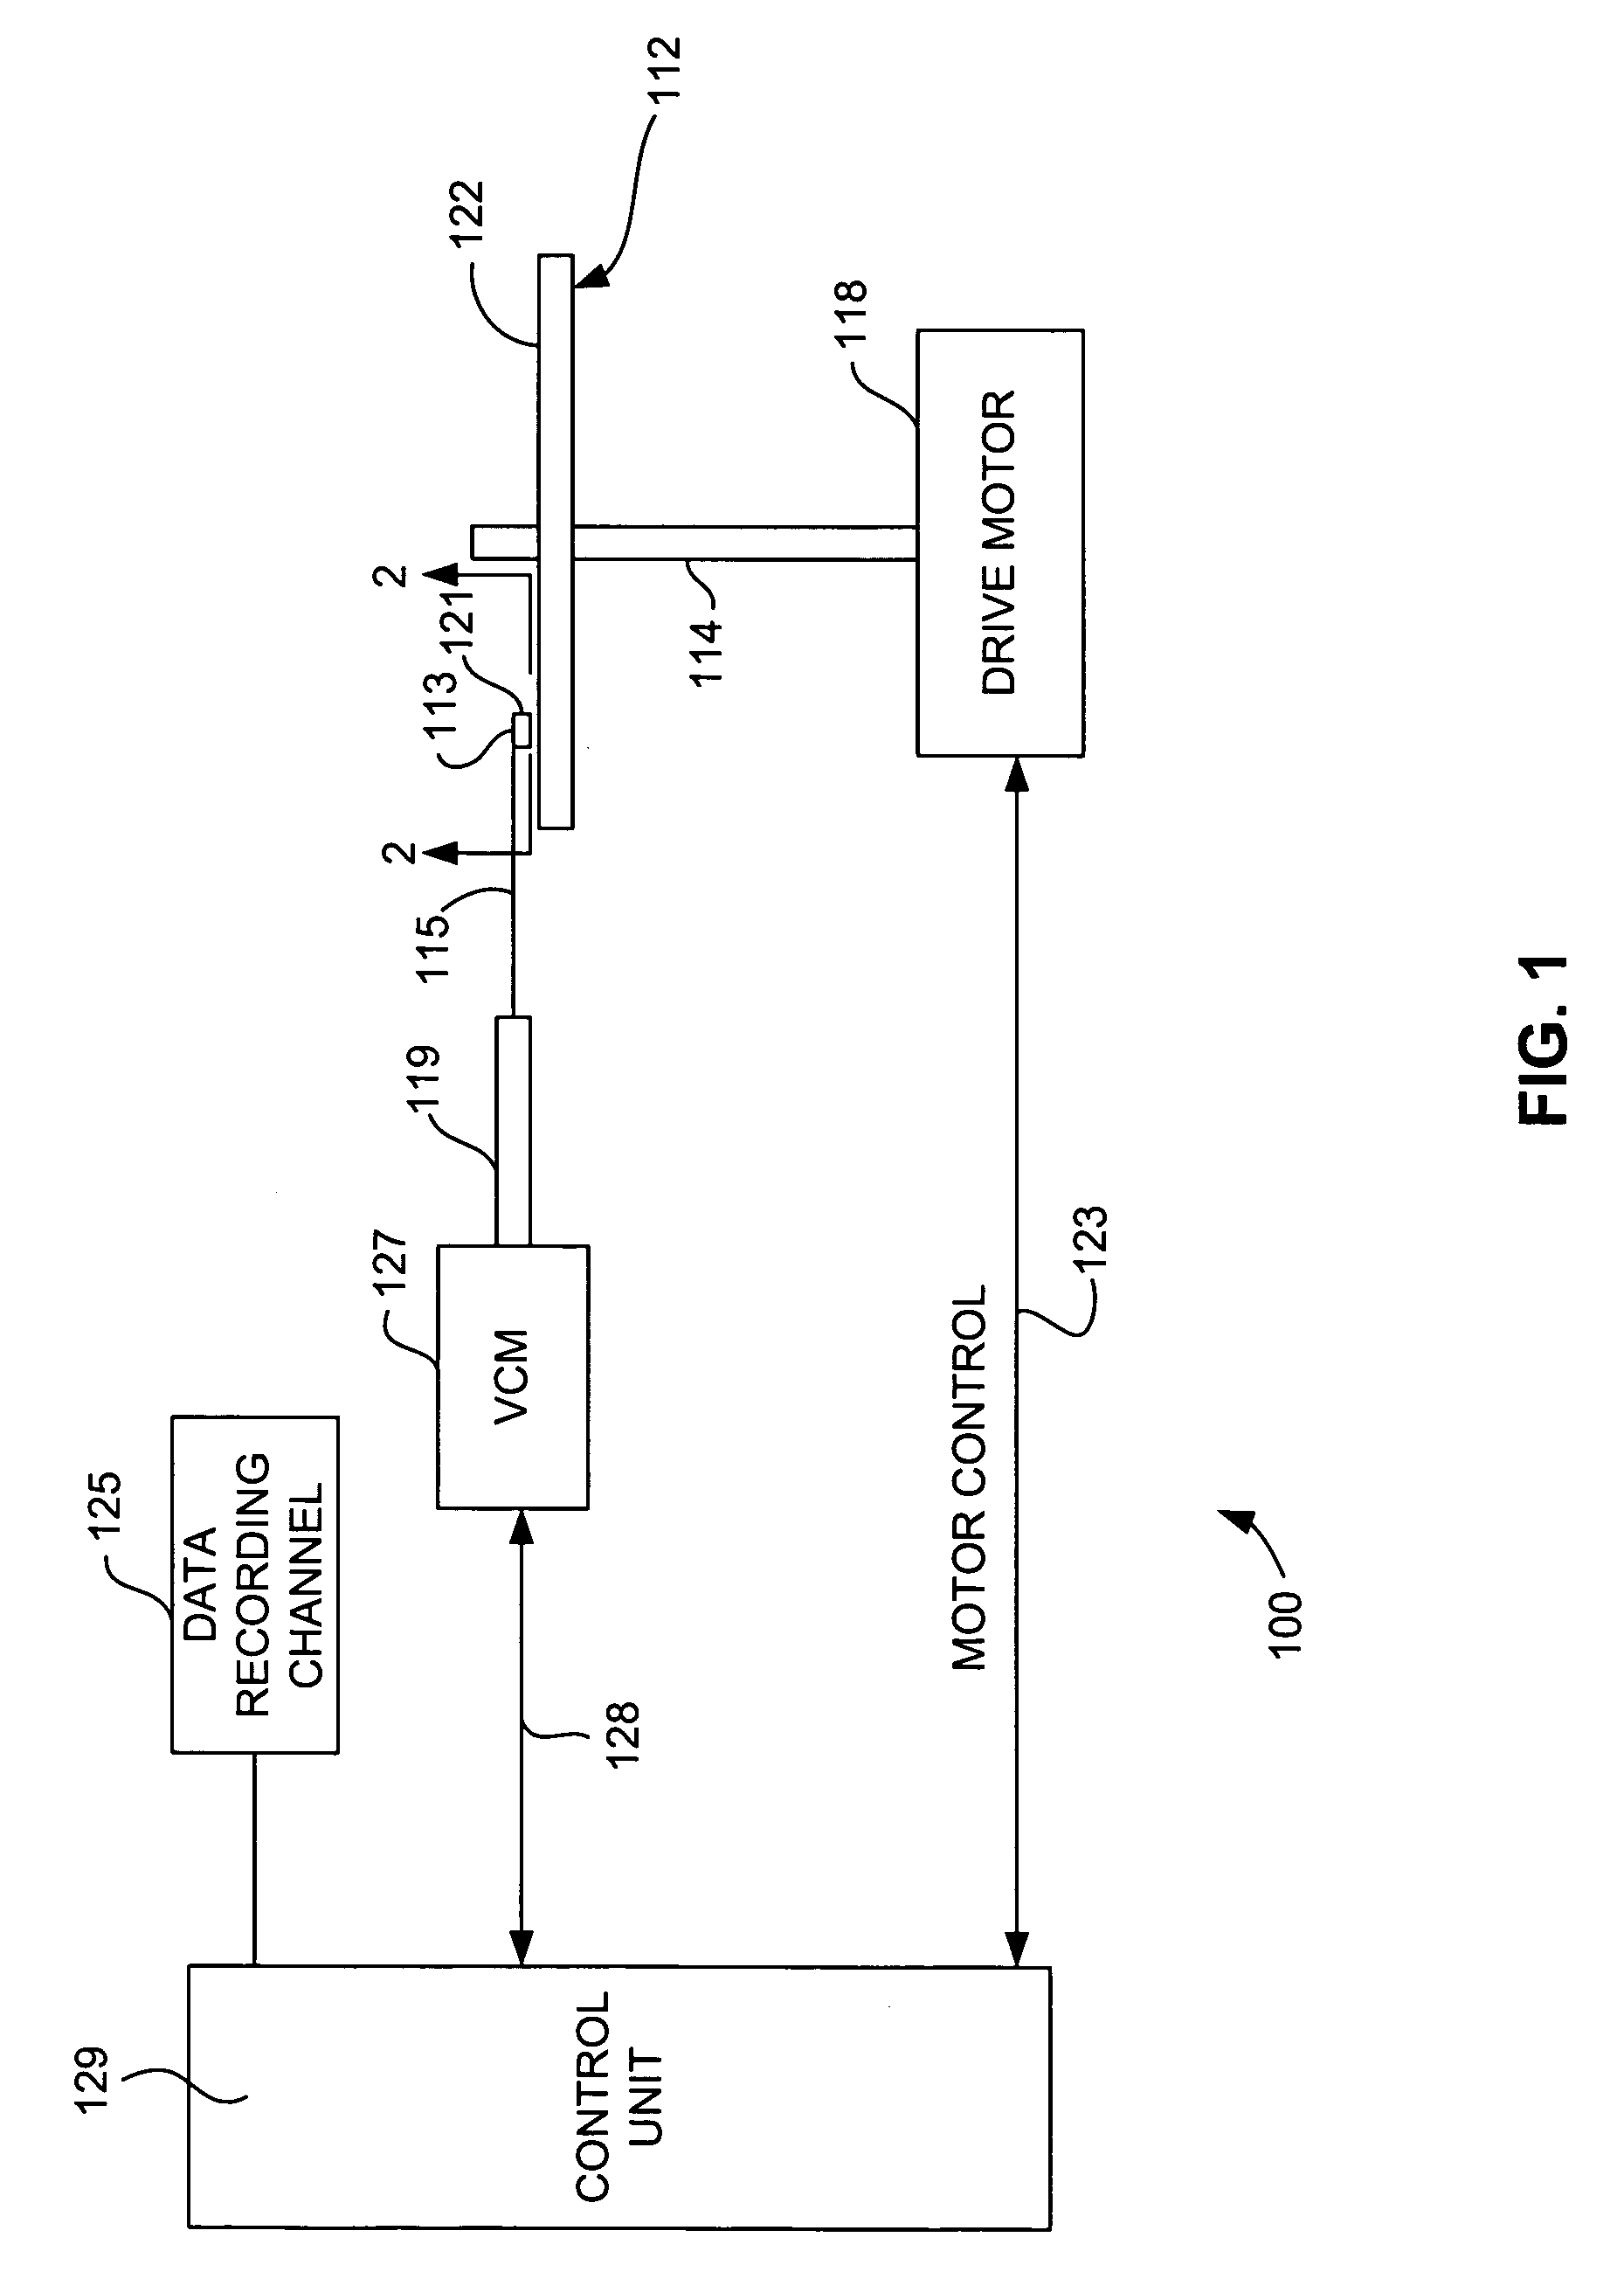 Dual CPP GMR sensor with in-stack bias structure